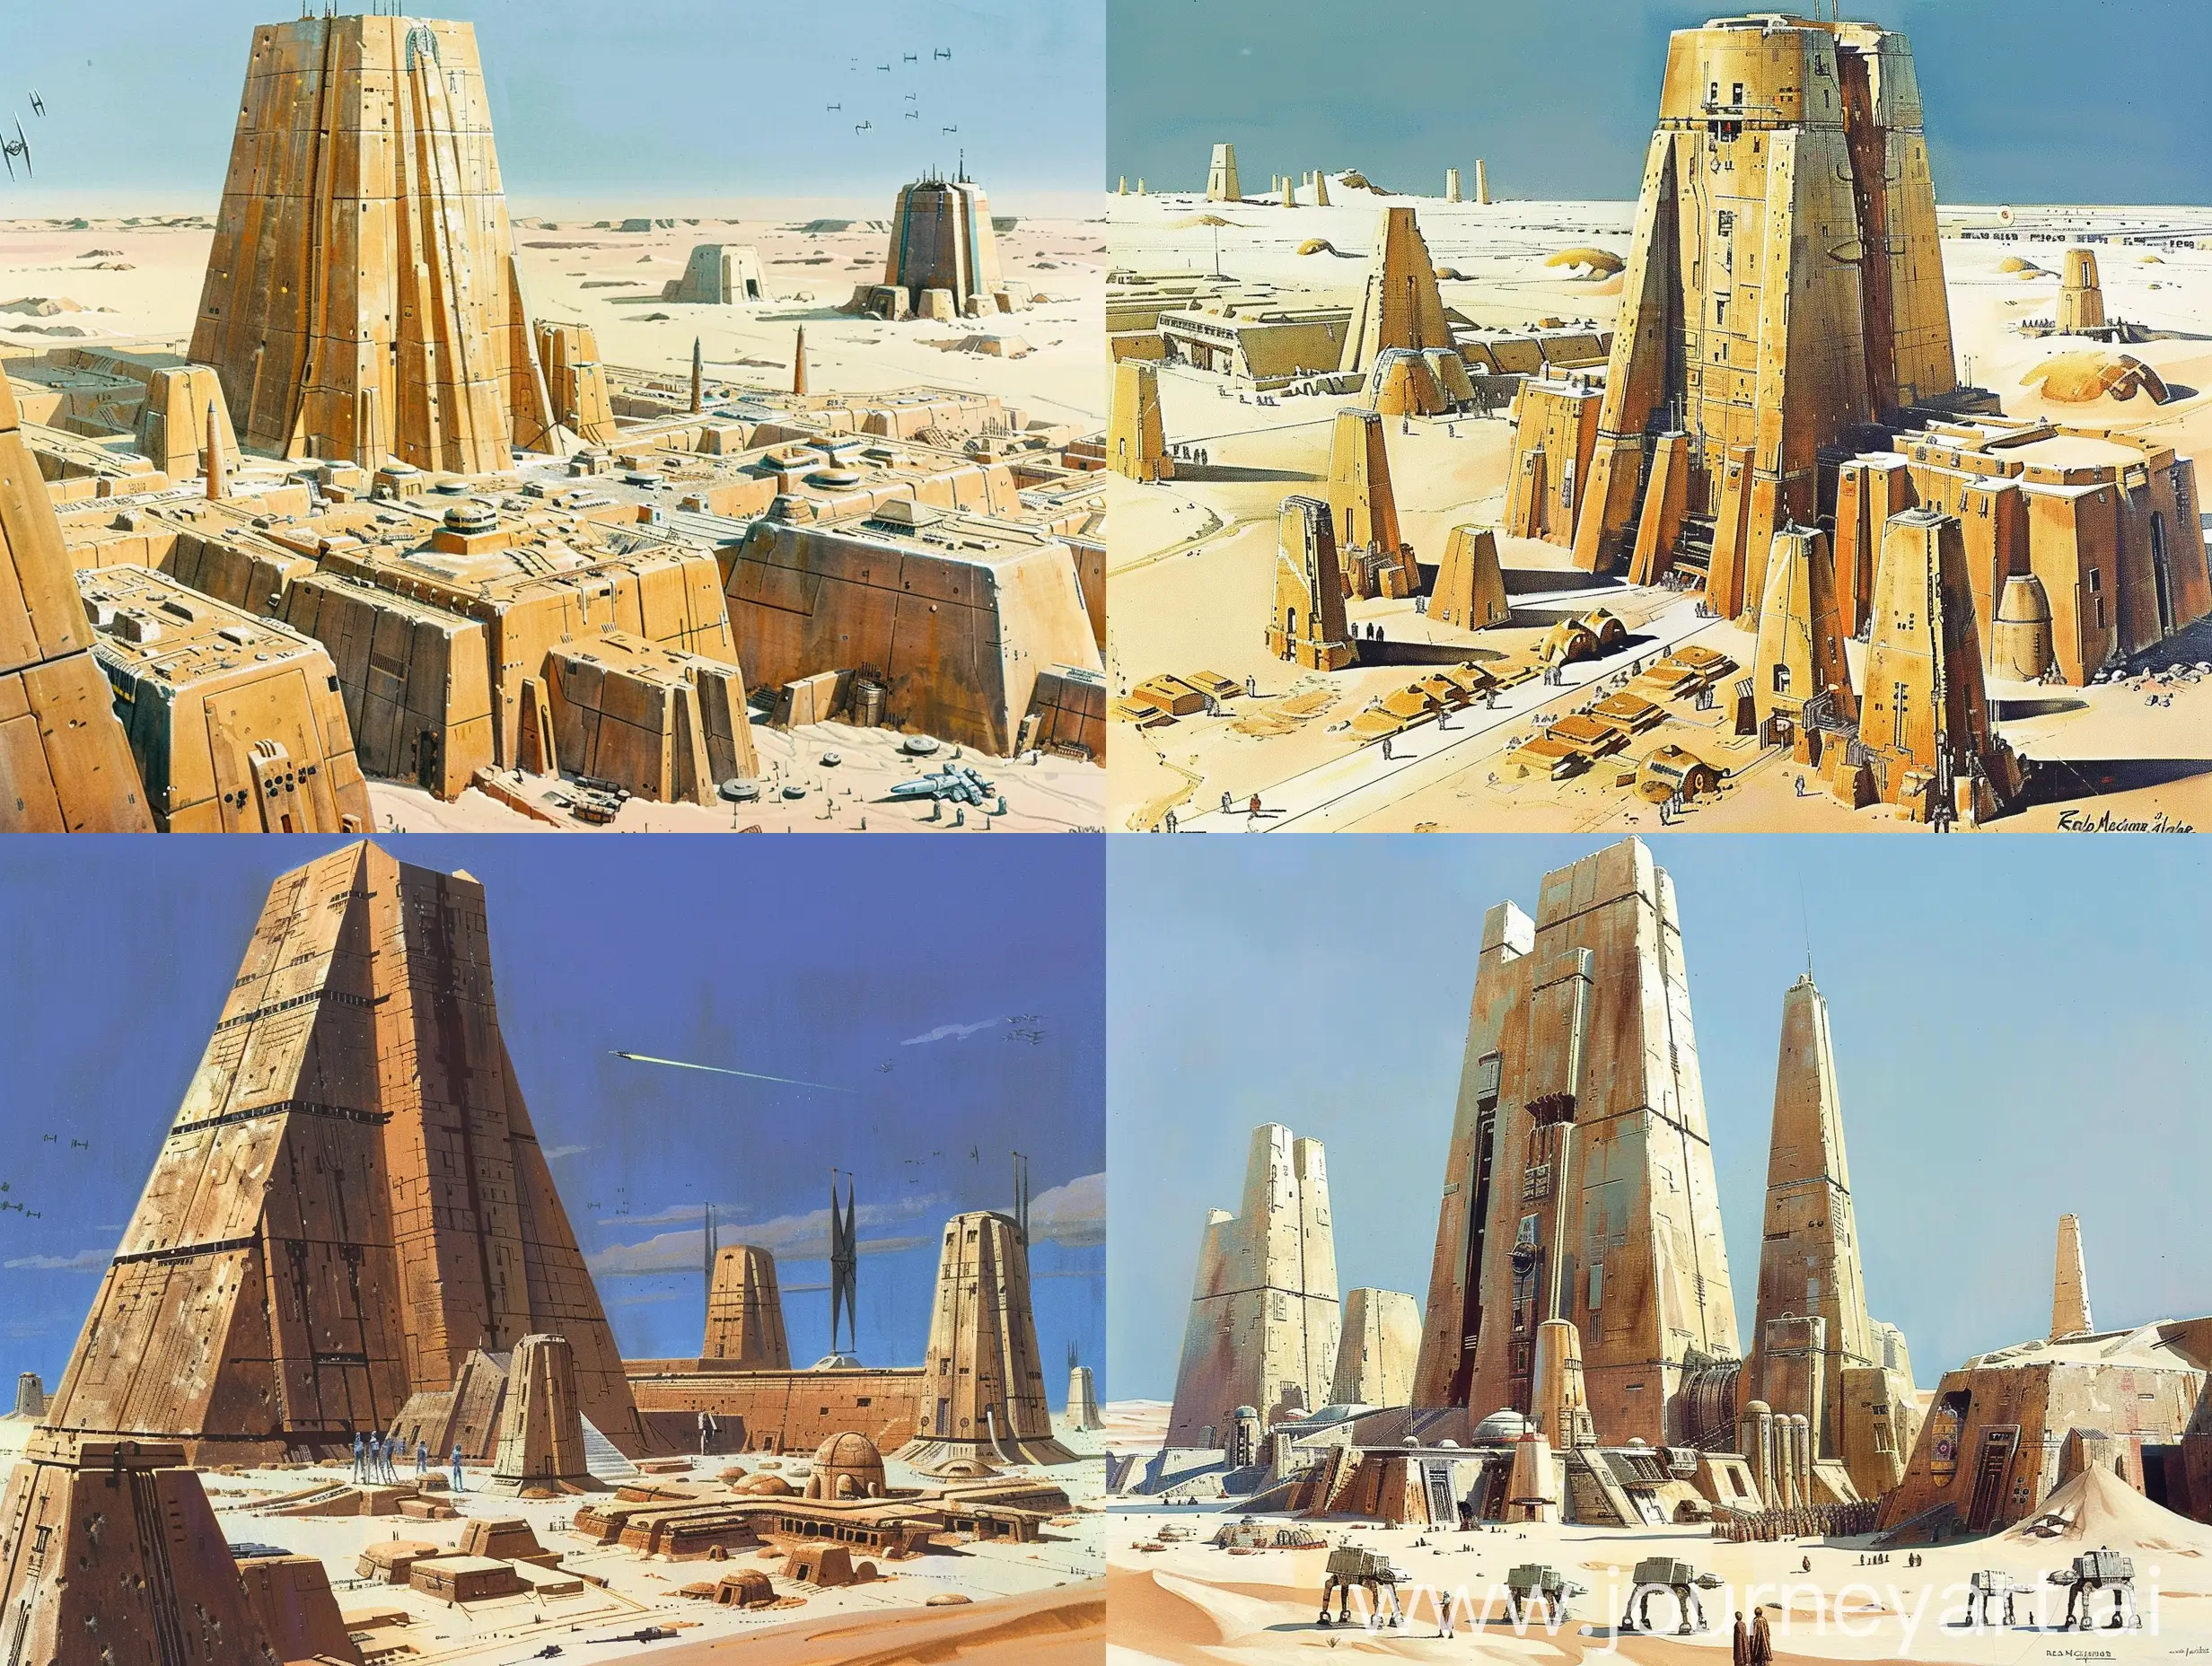 Retro-SciFi-Desert-Palace-Surrounded-by-City-Buildings